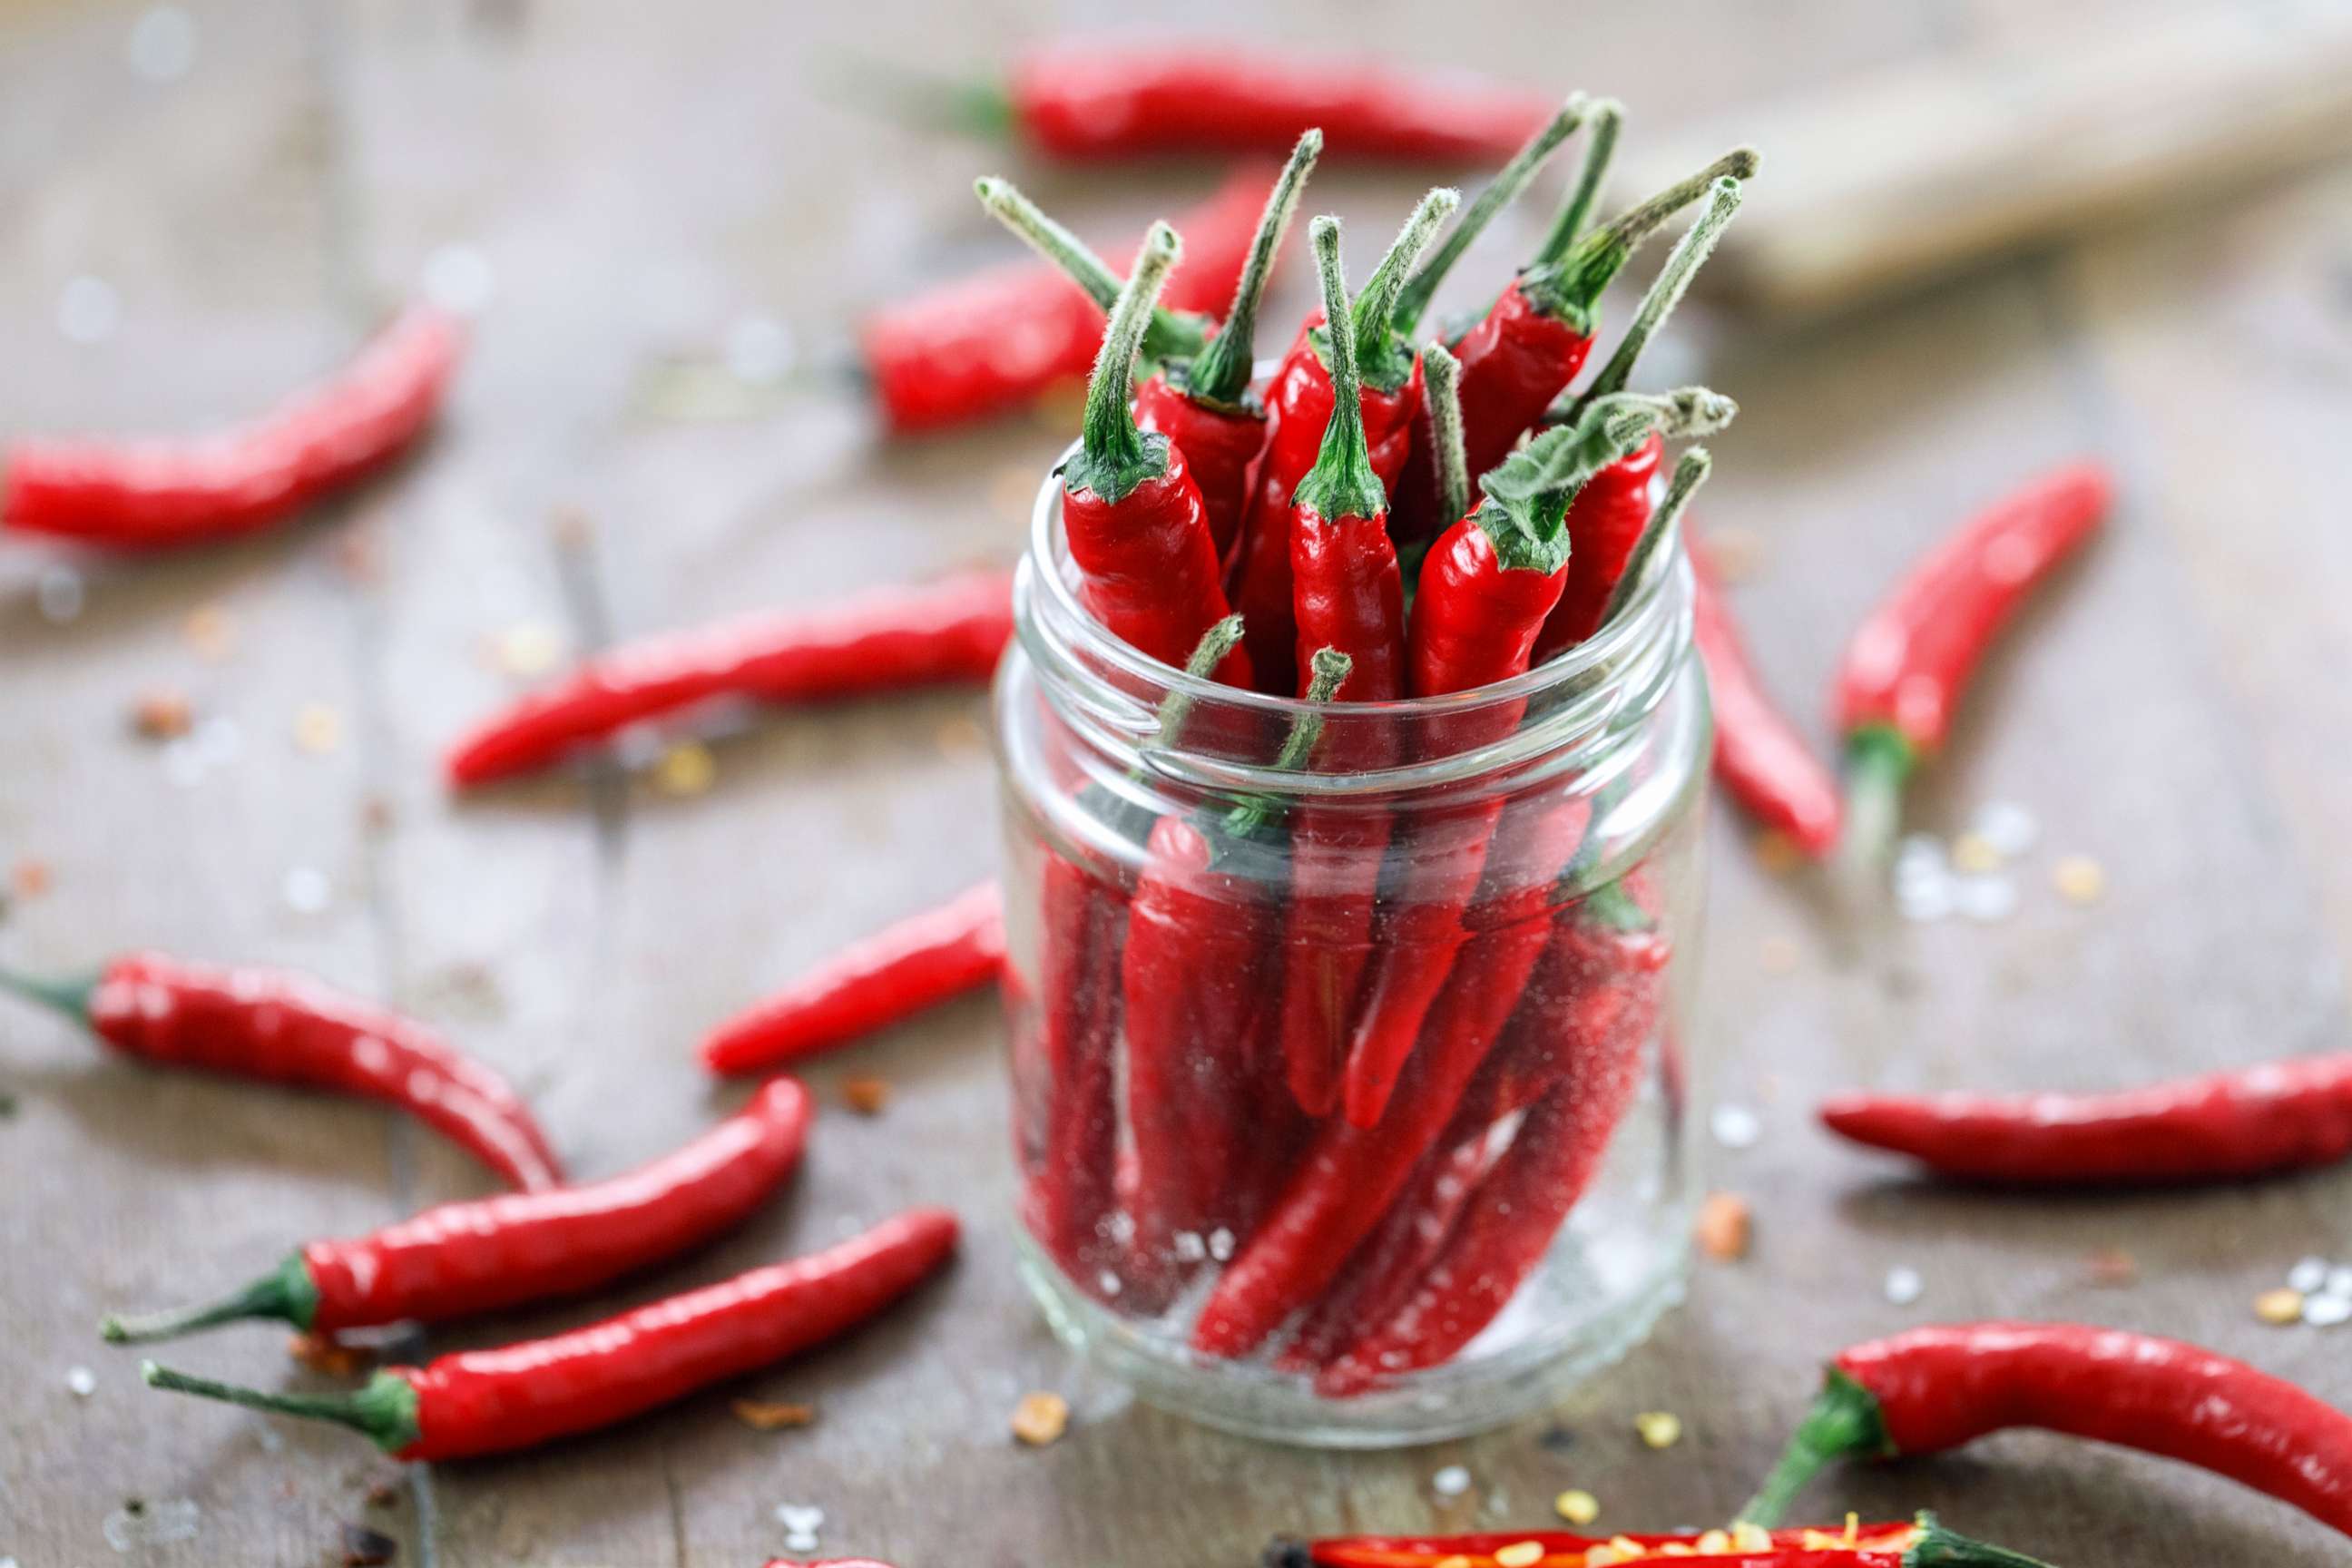 PHOTO: Chili peppers are seen in this stock photo.